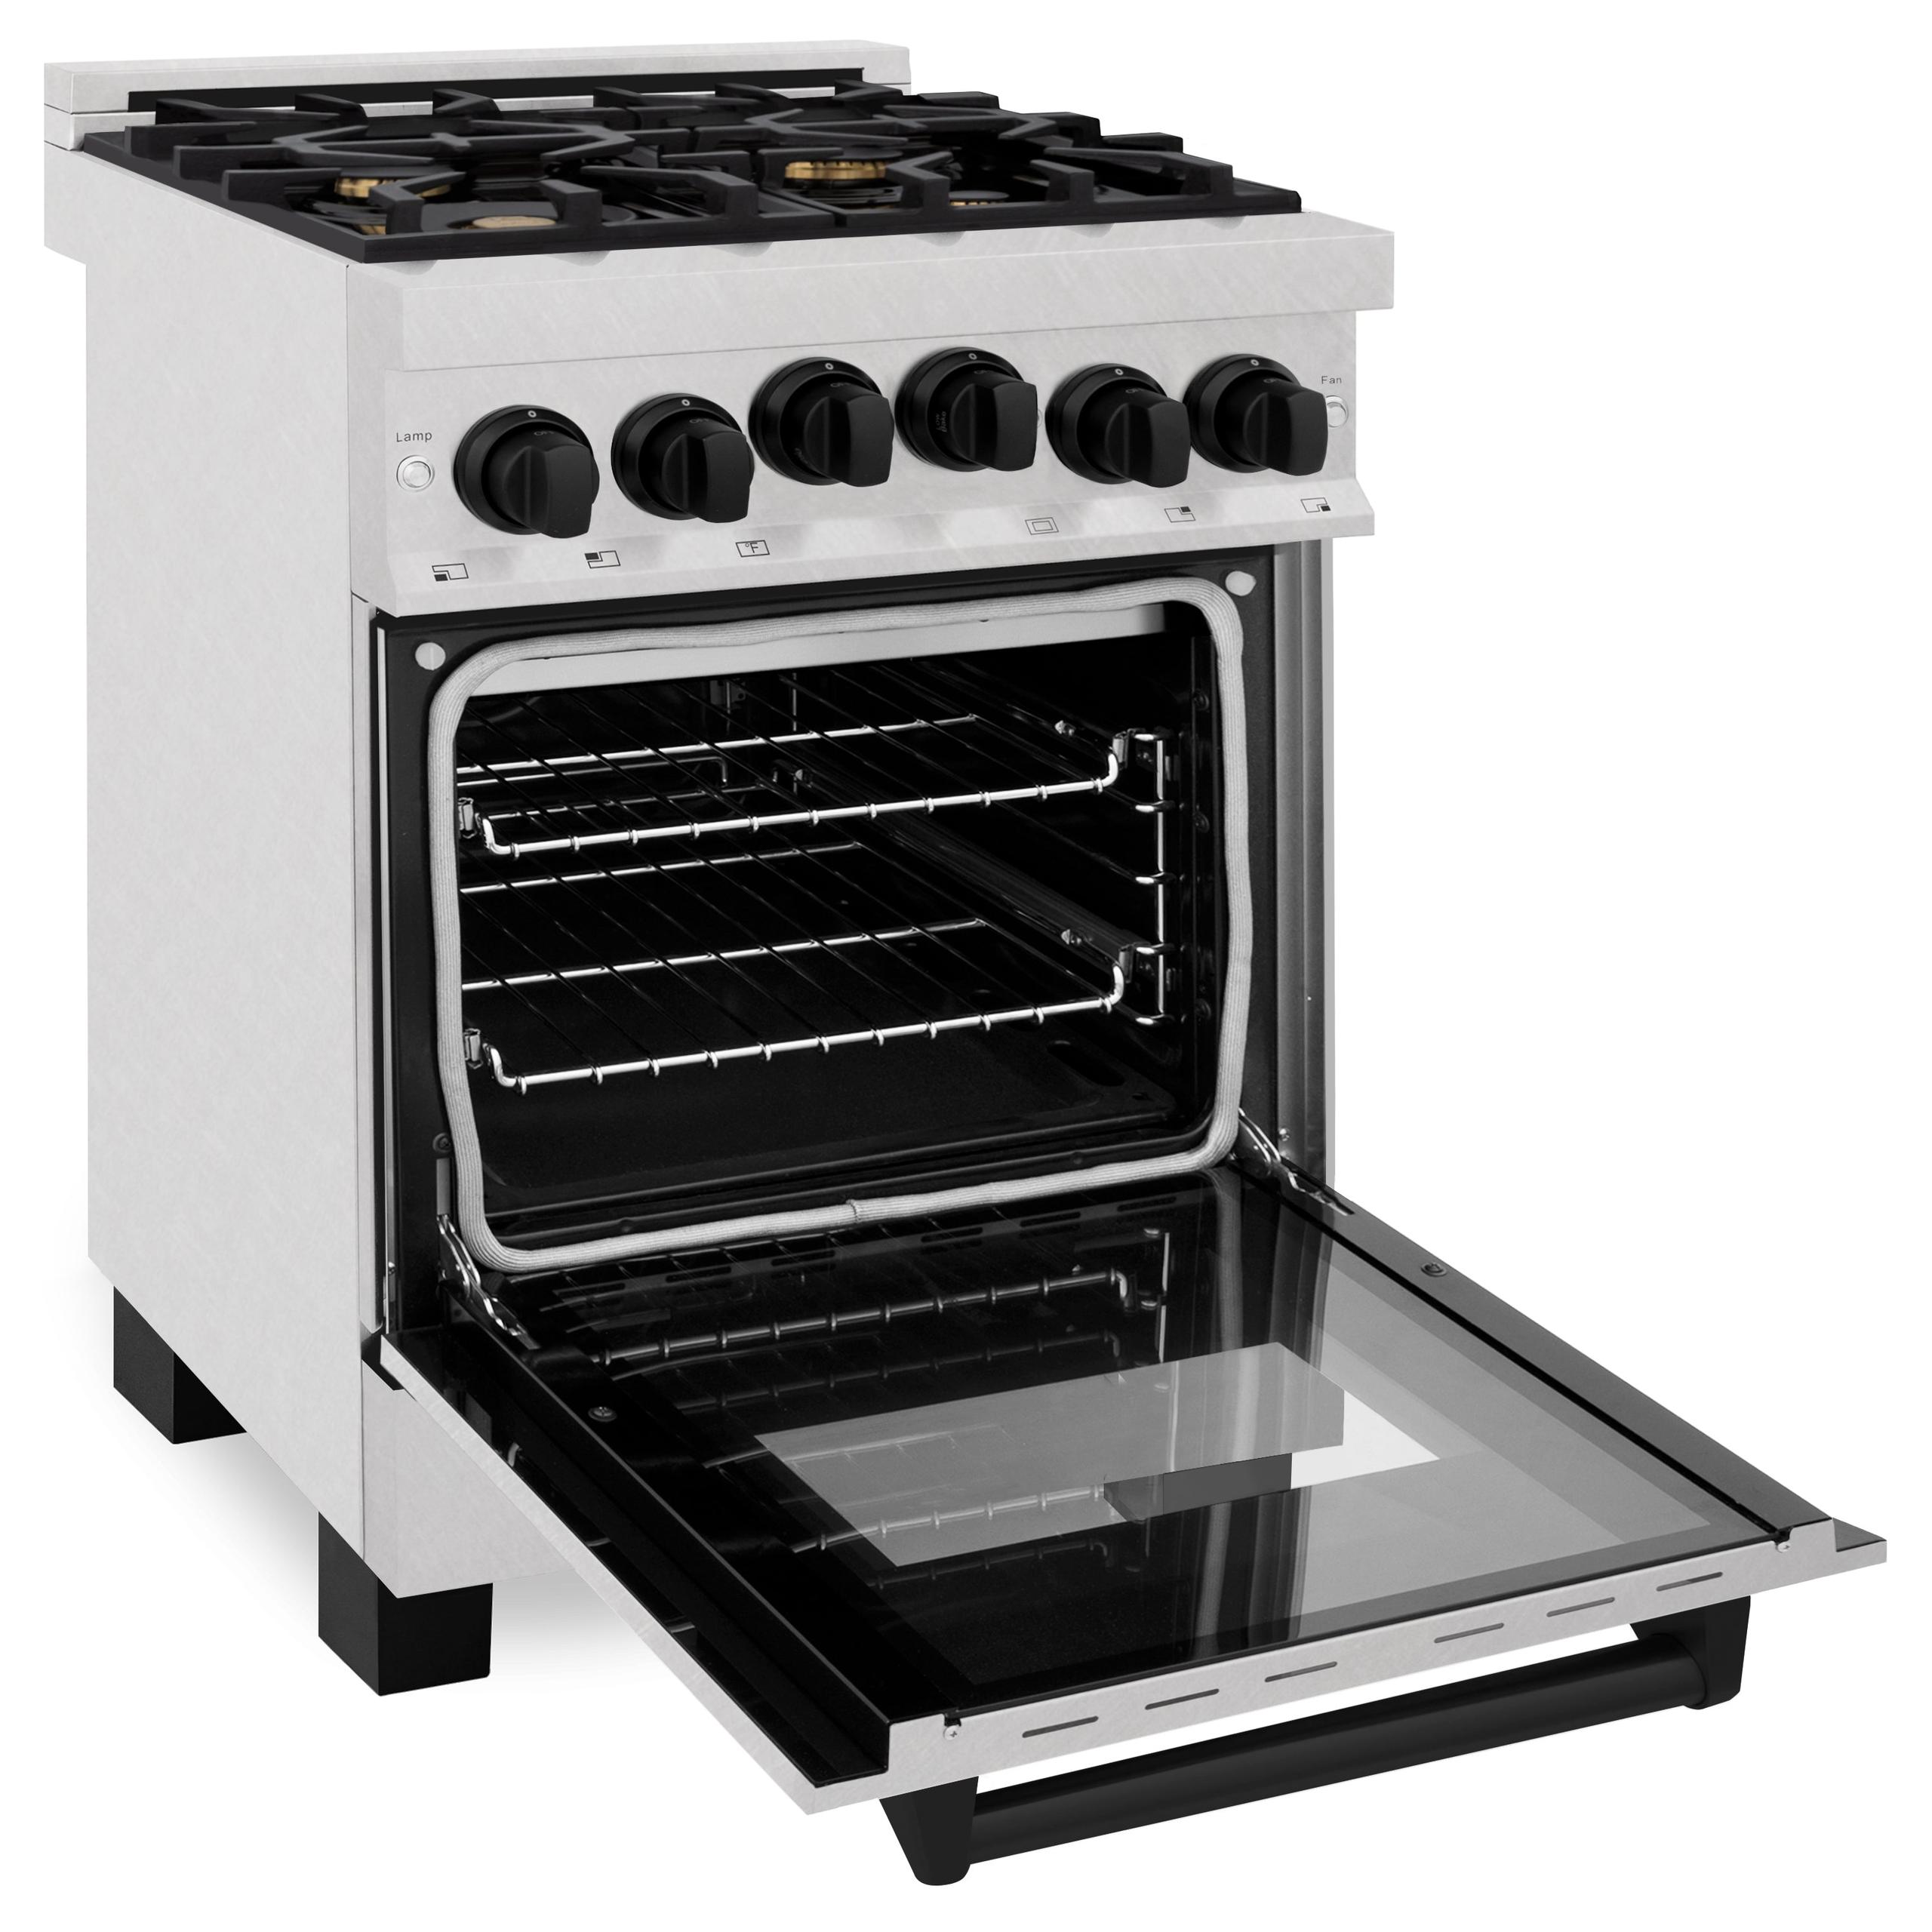 ZLINE KITCHEN AND BATH RGSZSN24CB ZLINE Autograph Edition 24" 2.8 cu. ft. Range with Gas Stove and Gas Oven in DuraSnow R Stainless Steel with Champagne Bronze Accents Color: Champagne Bronze